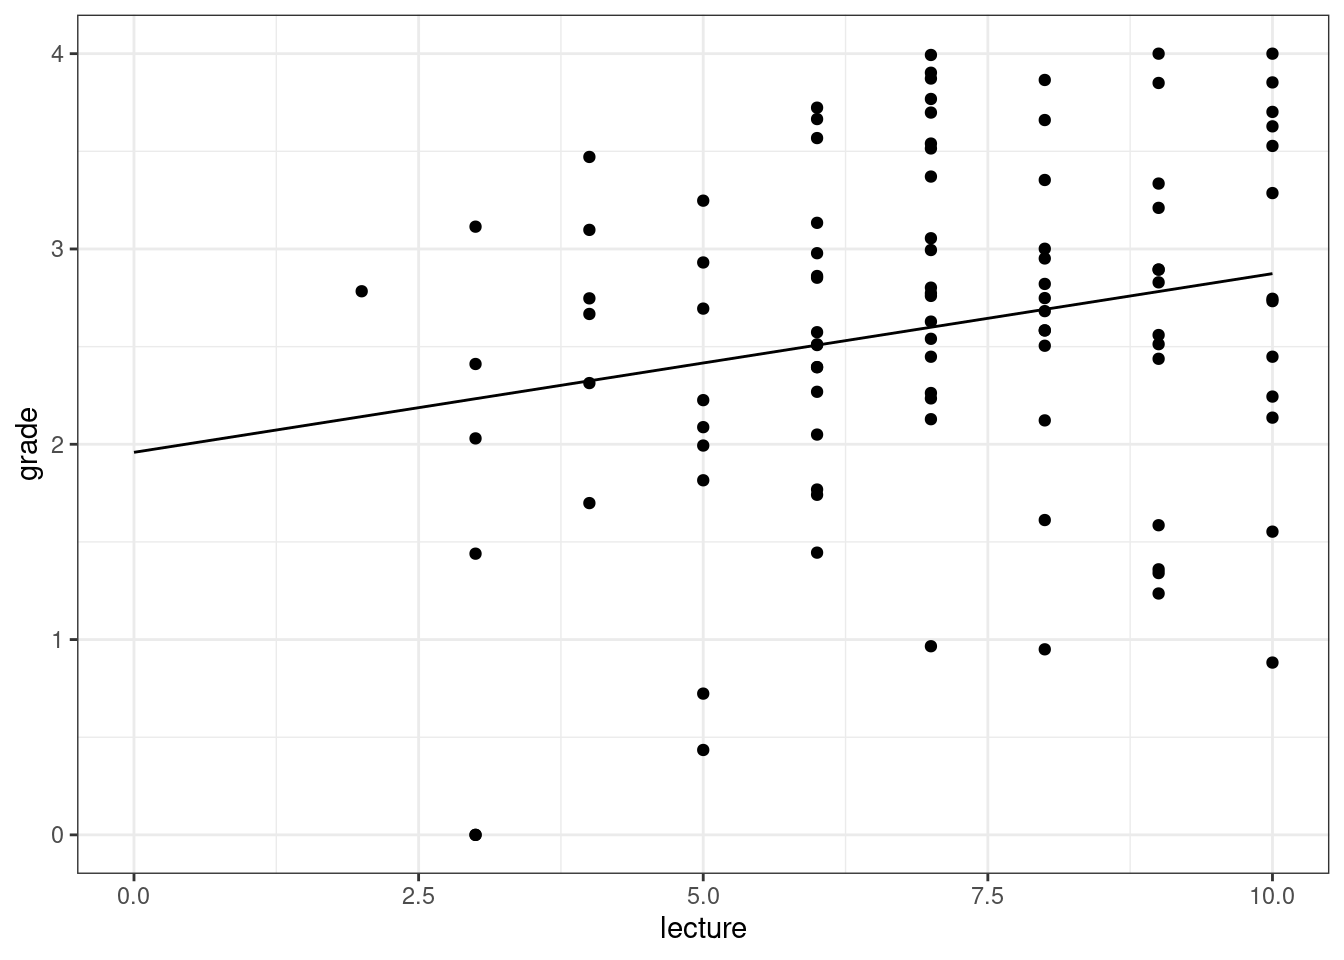 Partial effect of 'lecture' on grade, with nclicks at its mean value.